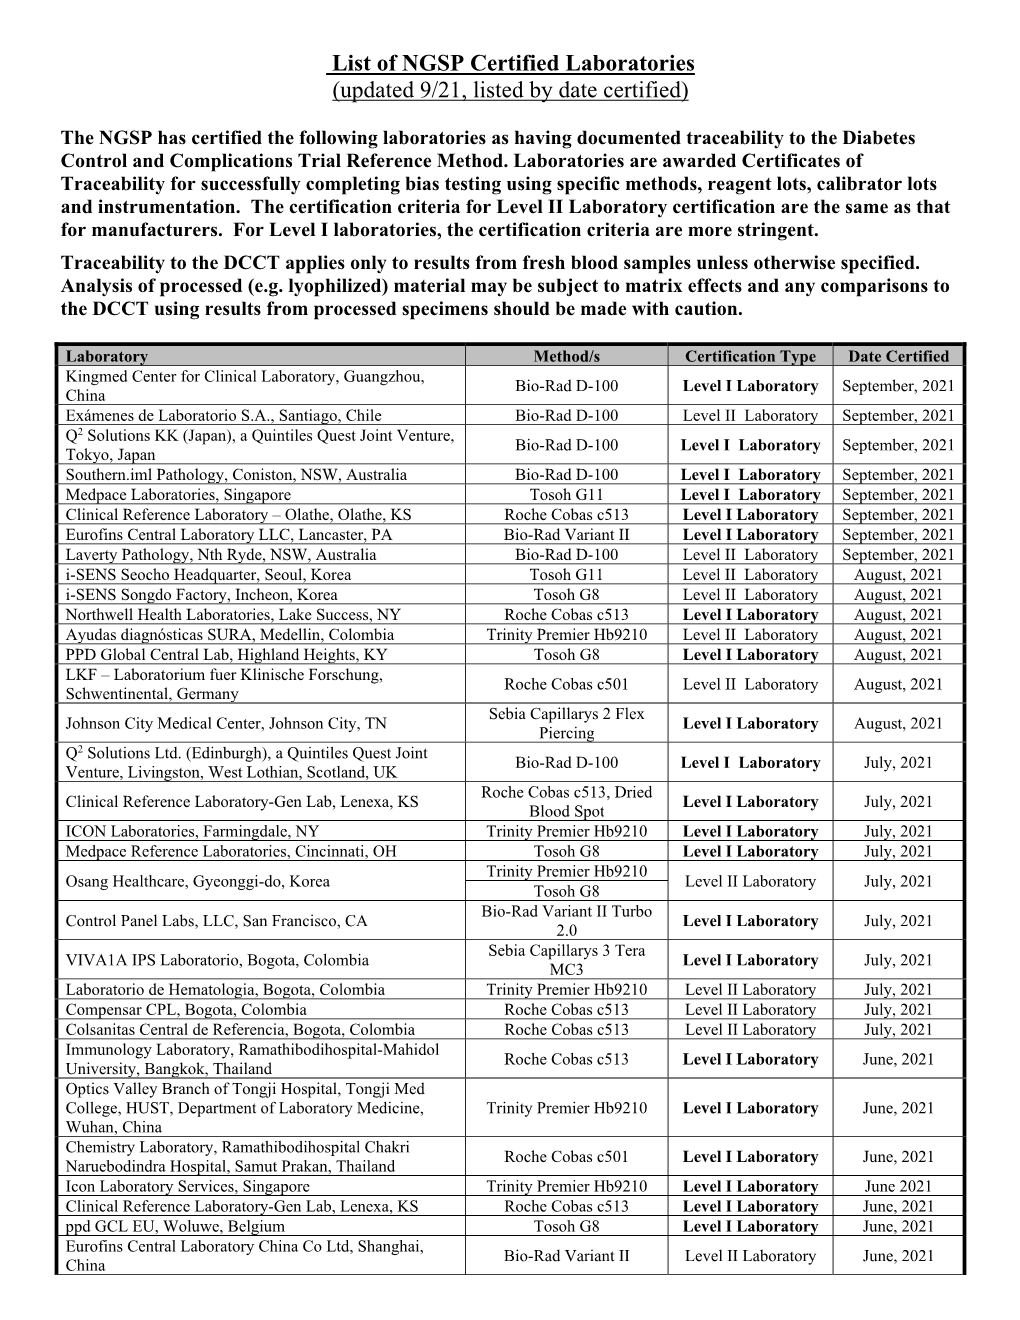 List of NGSP Certified Laboratories (Updated 9/21, Listed by Date Certified)